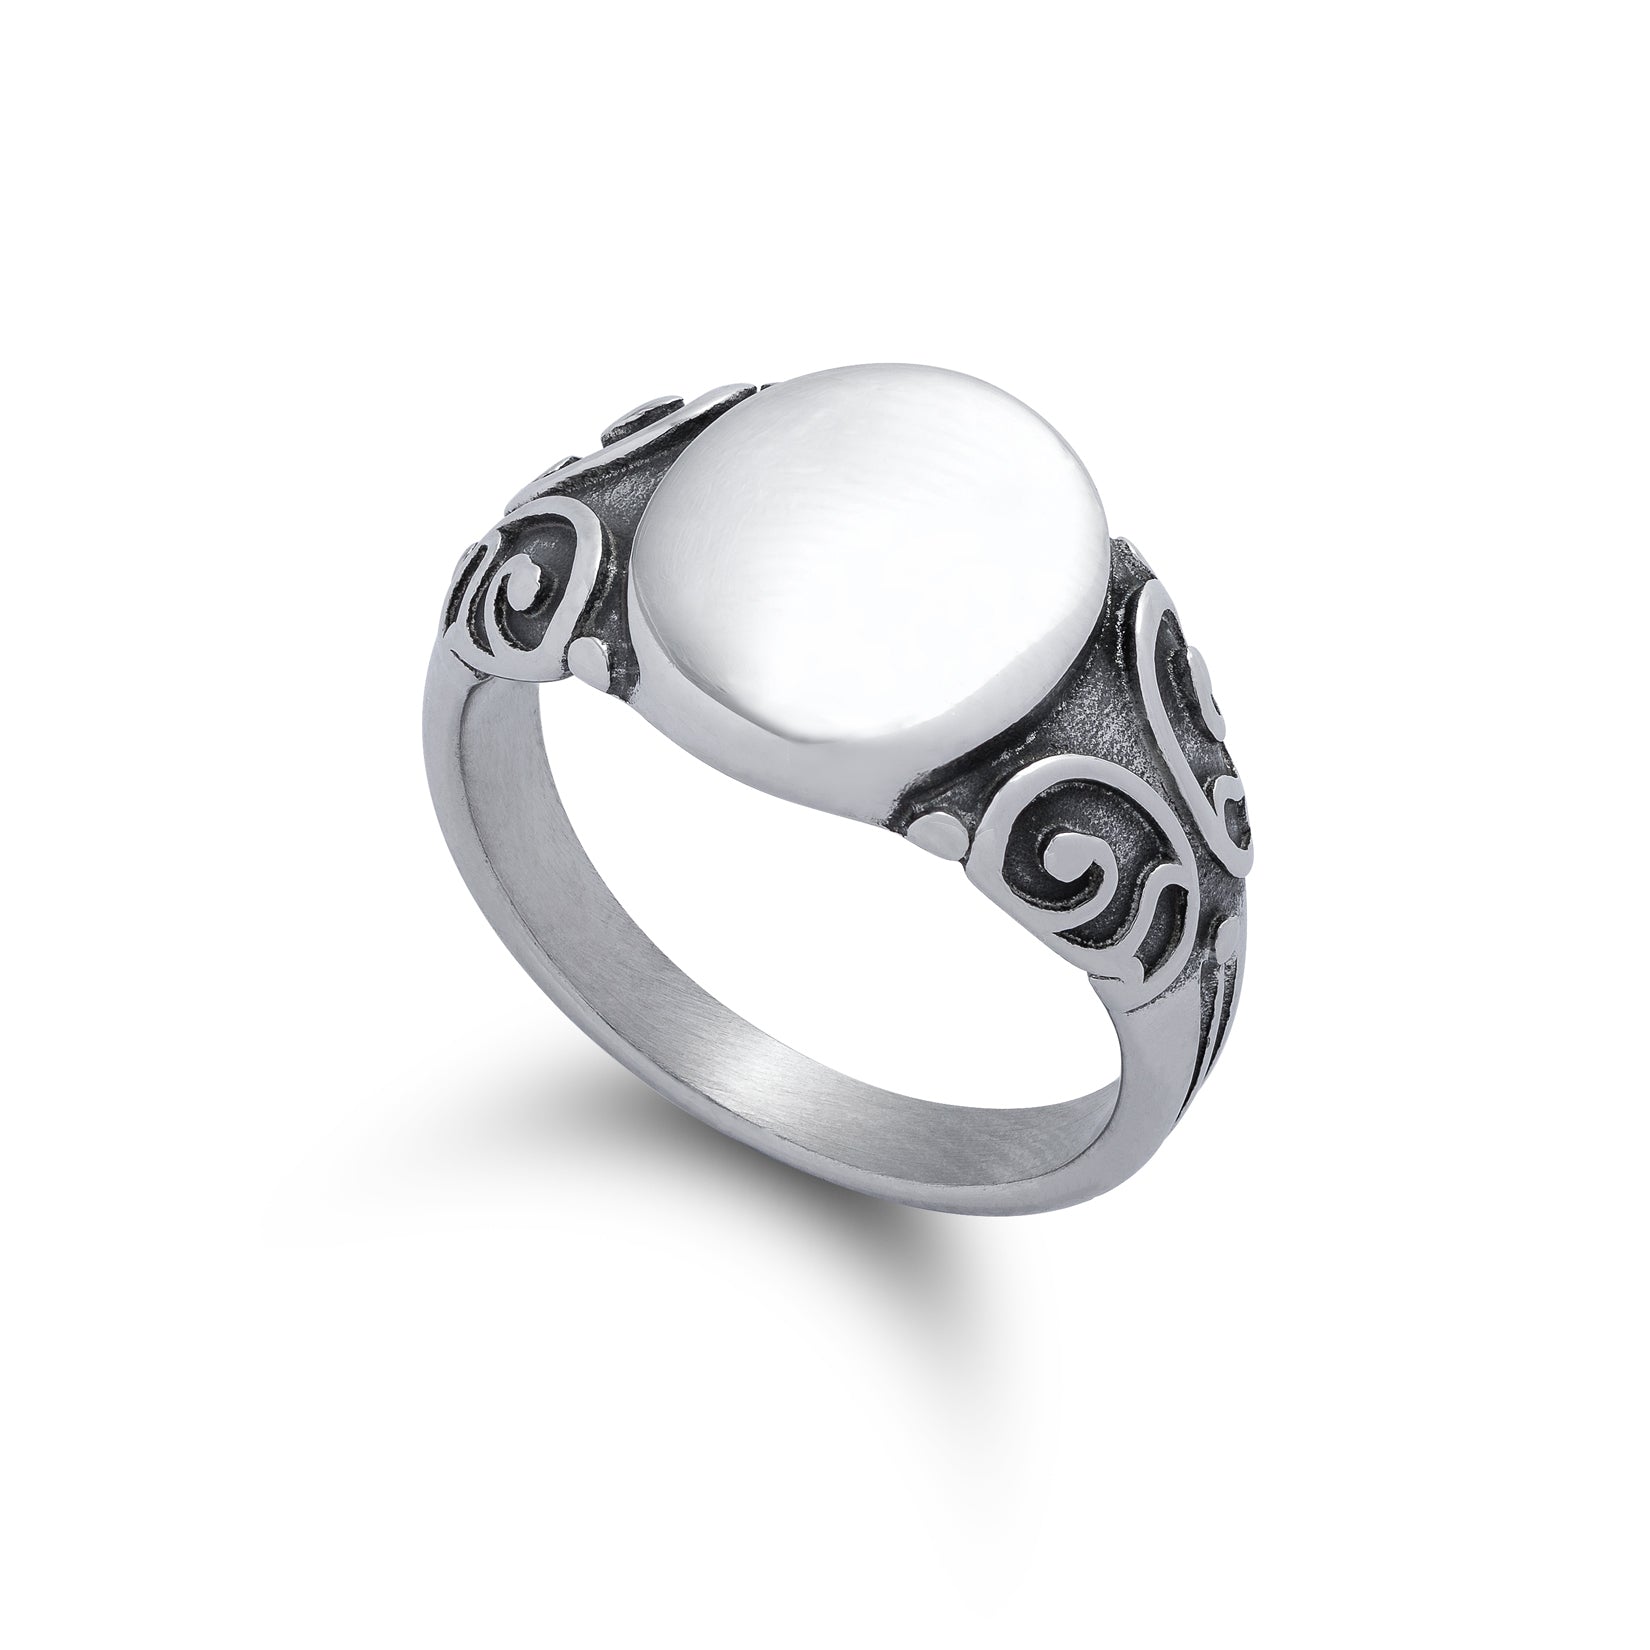 Scroll signet ring in silver by statement collective